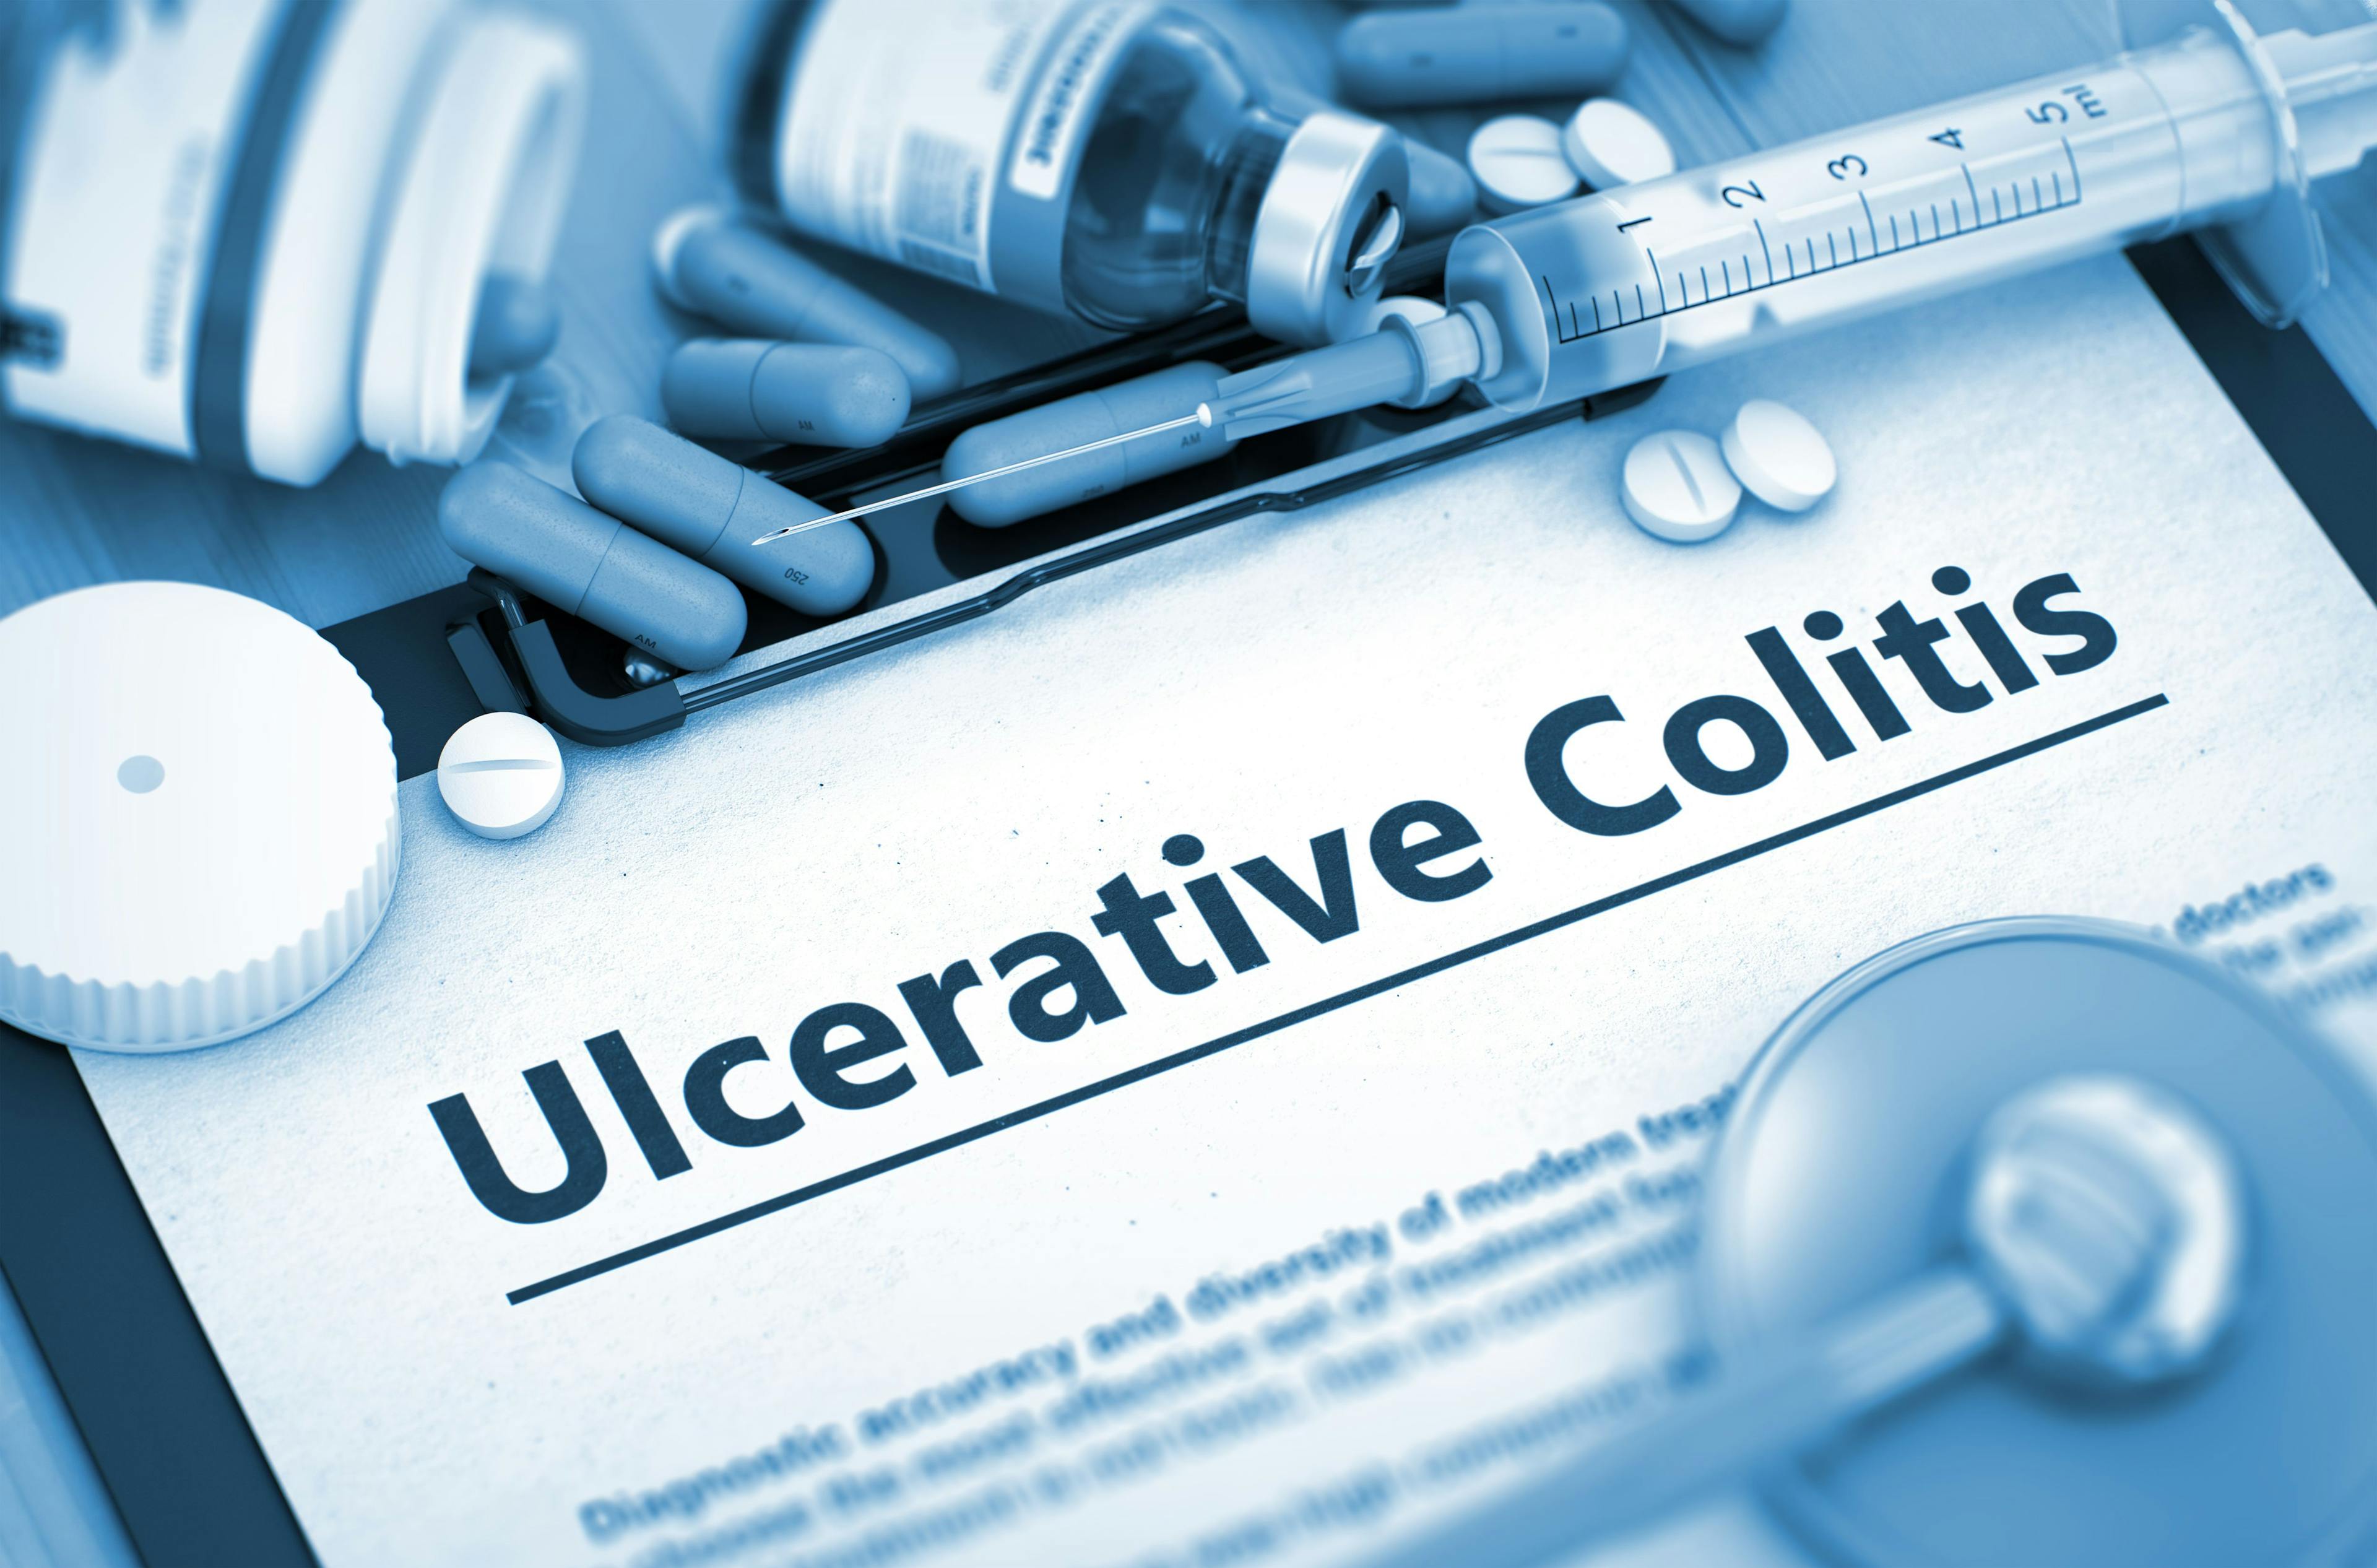 AbbVie Submits Applications for Skyrizi for Ulcerative Colitis